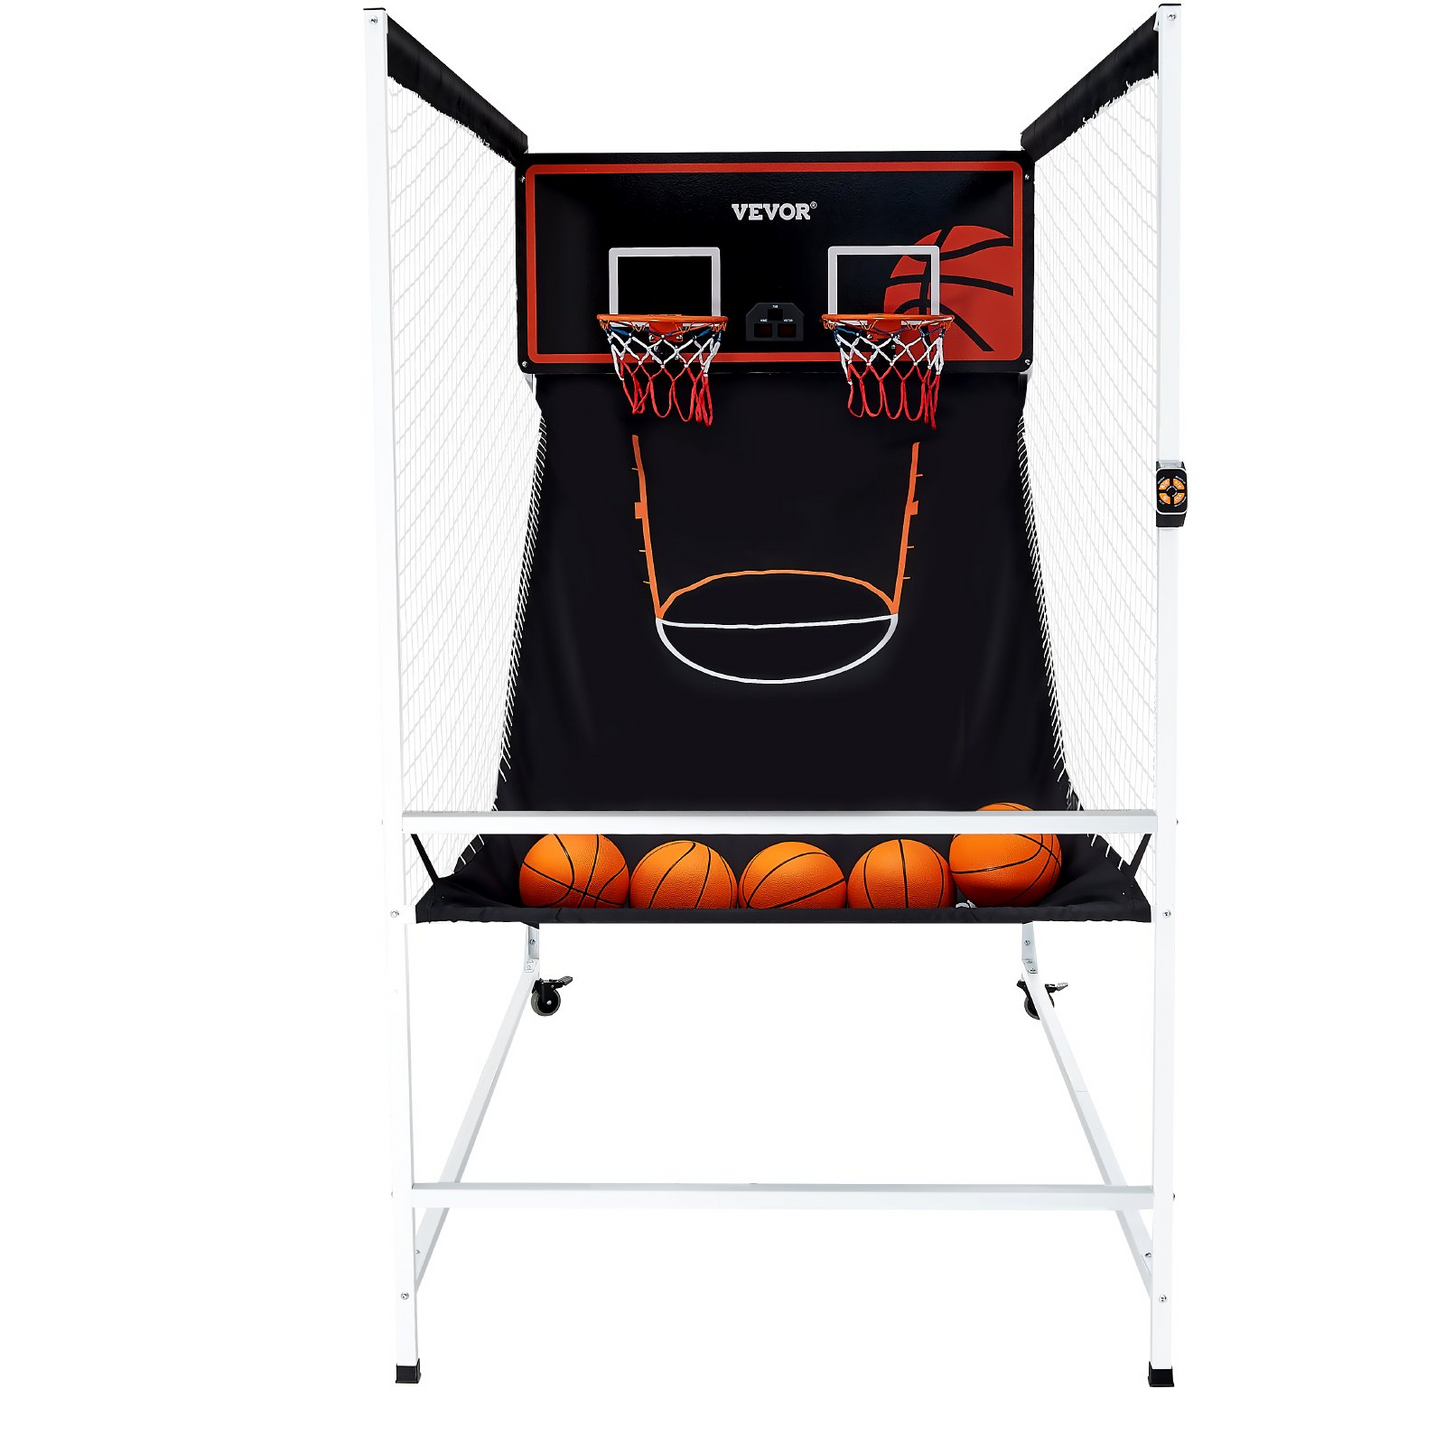 VEVOR Arcade Cage Basketball Game, 2 Player Indoor Basketball Game, Home Dual Shot Sport with 5 Balls, 8 Game Modes, Electronic Scoreboard, and Inflation Pump, for Kids, Adults (Black & White), Goodies N Stuff